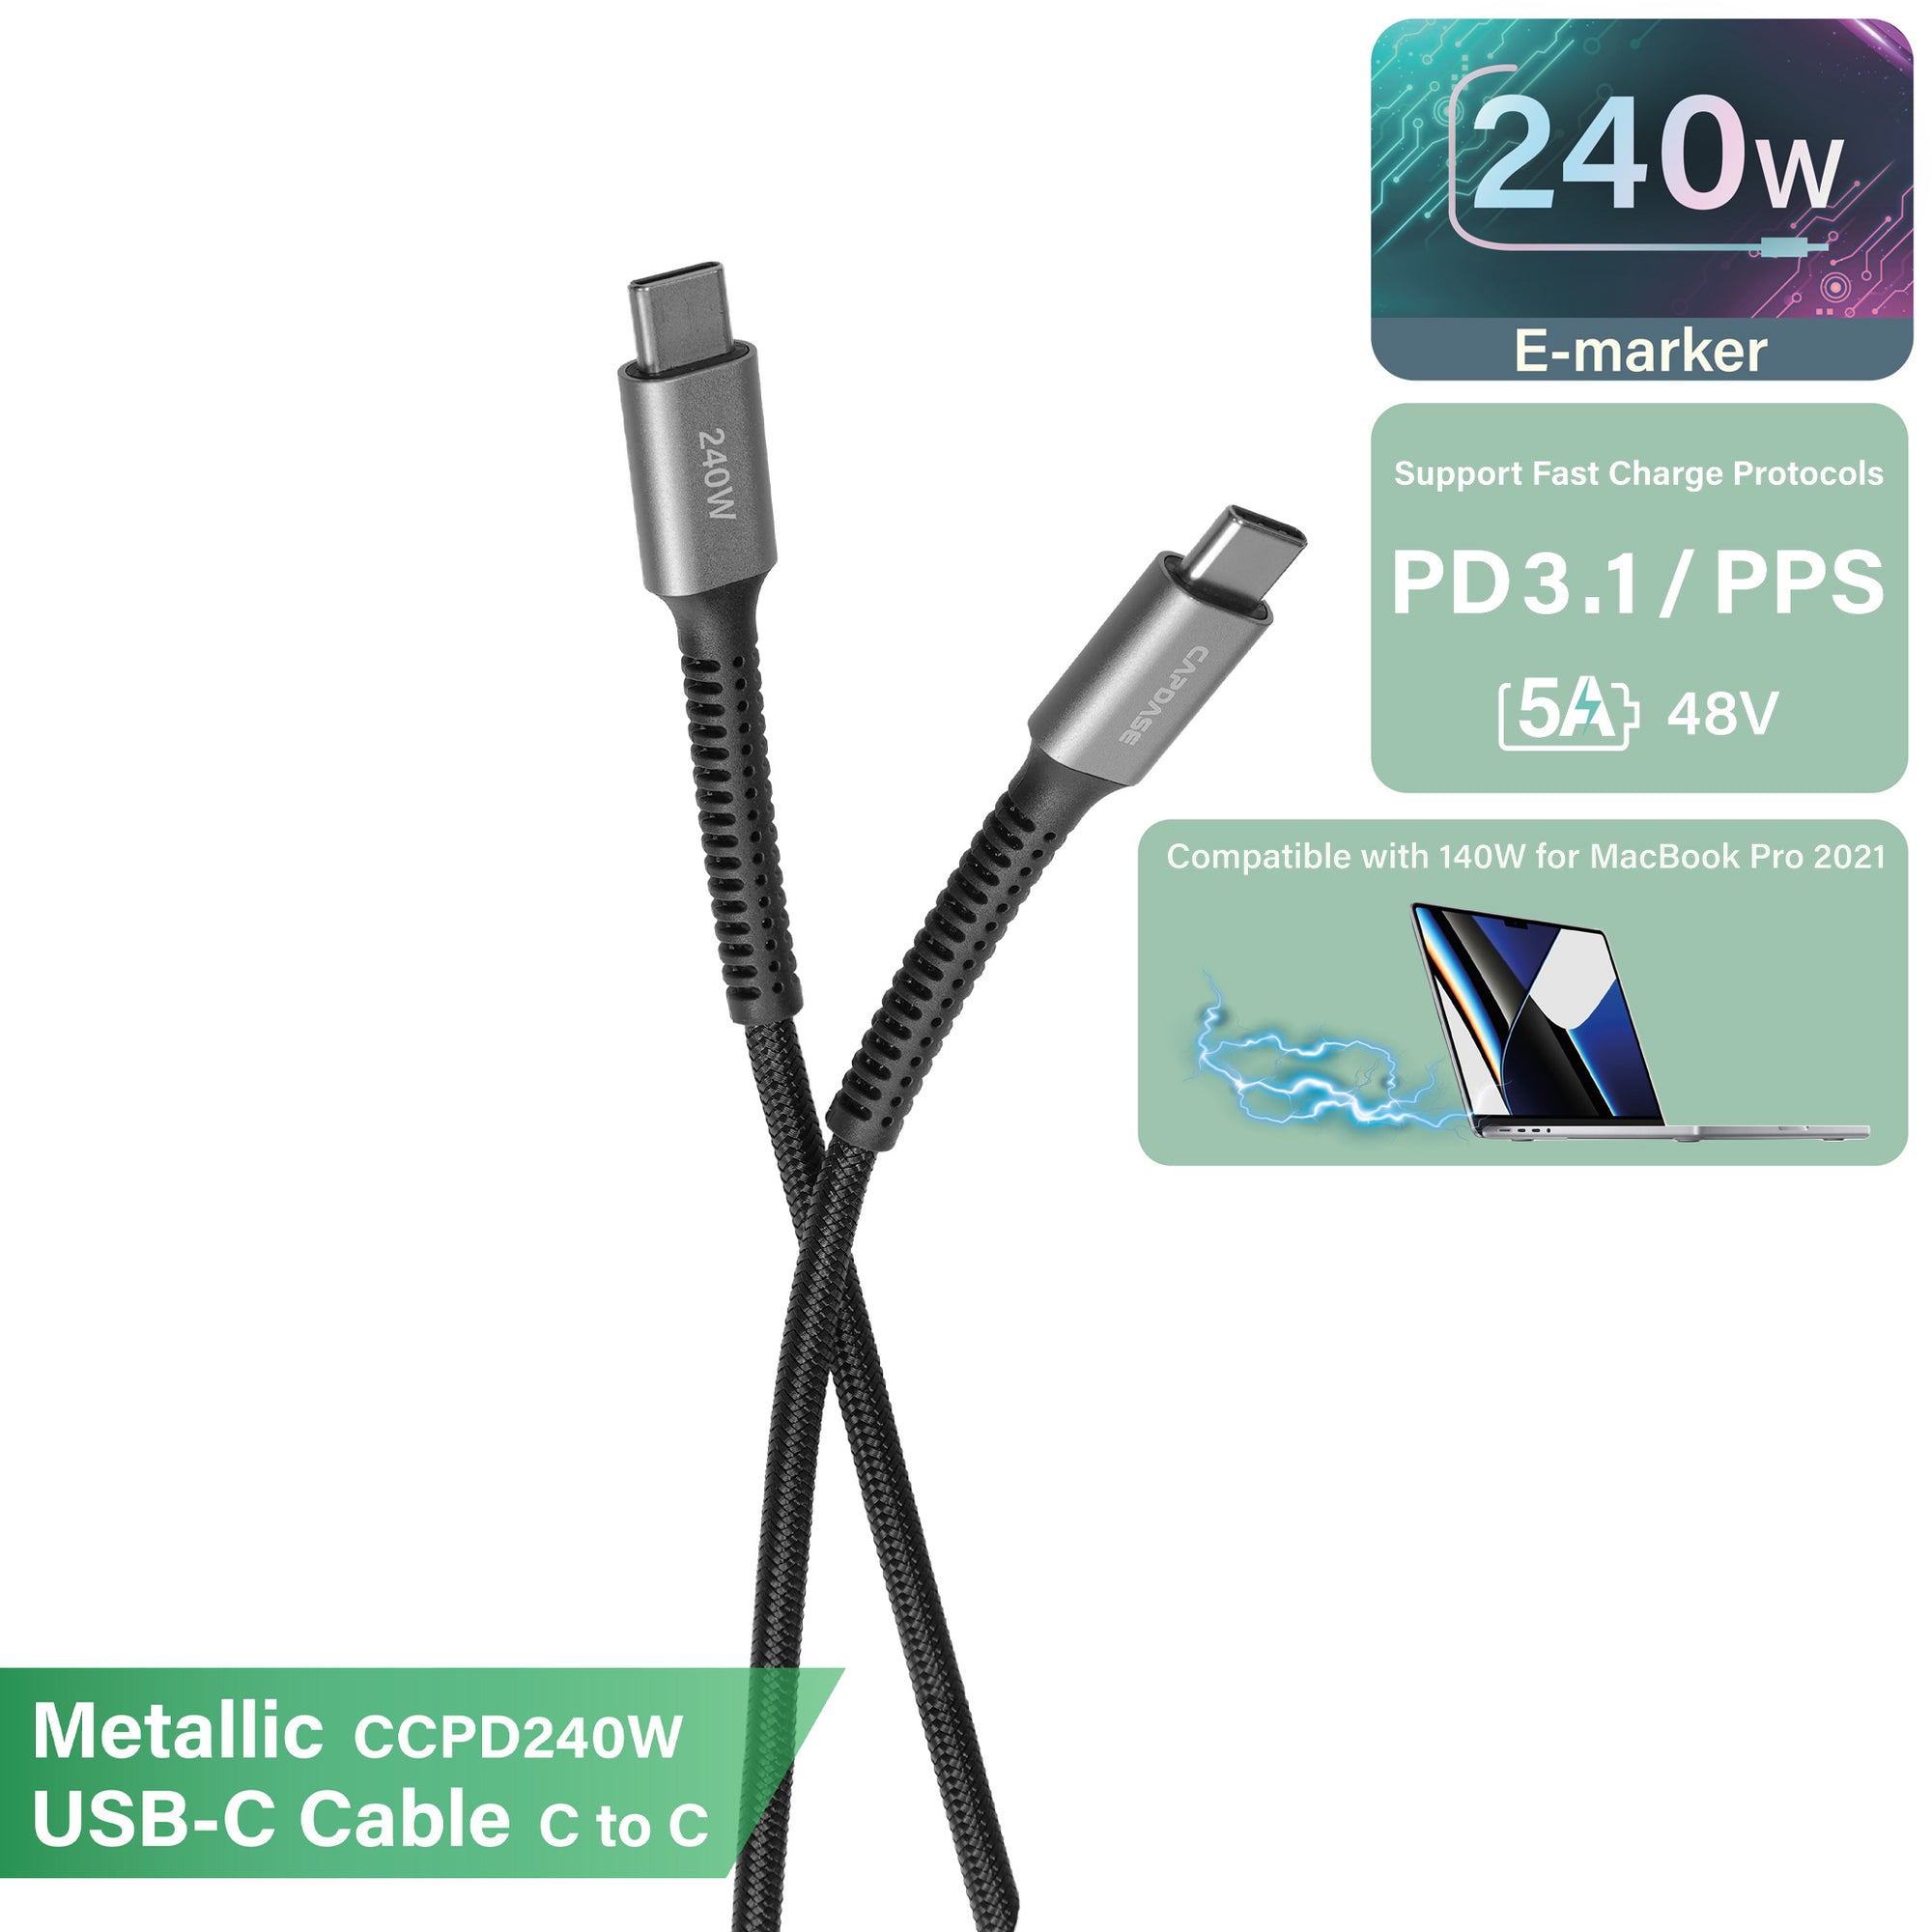 METALLIC CCPD240W_2M USB-C To USB-C Sync and Charge Cable (240W) 2M